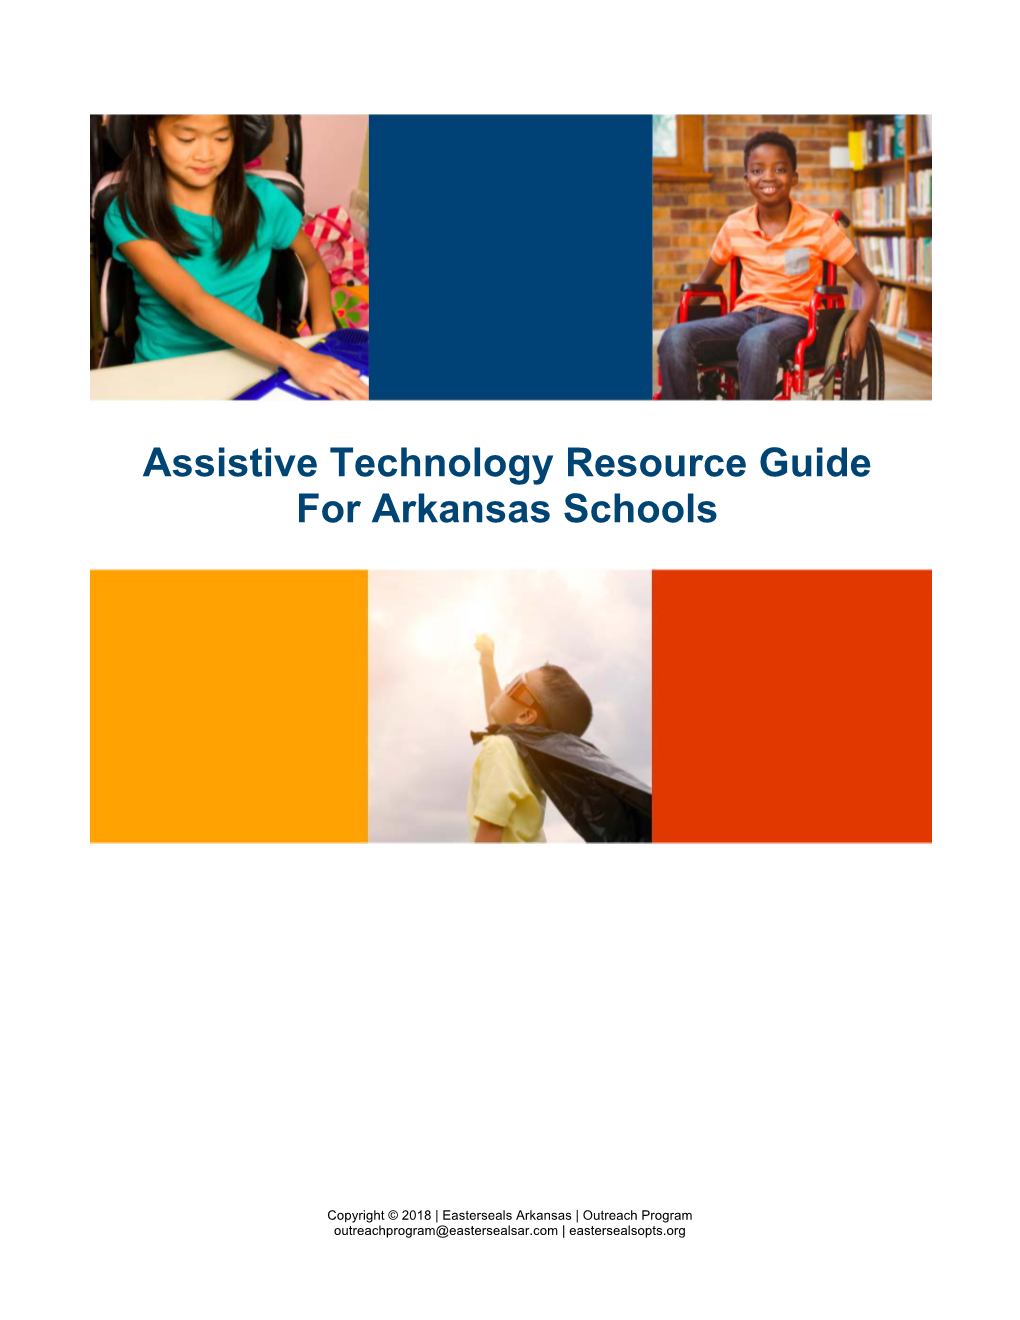 Assistive Technology Resource Guide for Arkansas Schools